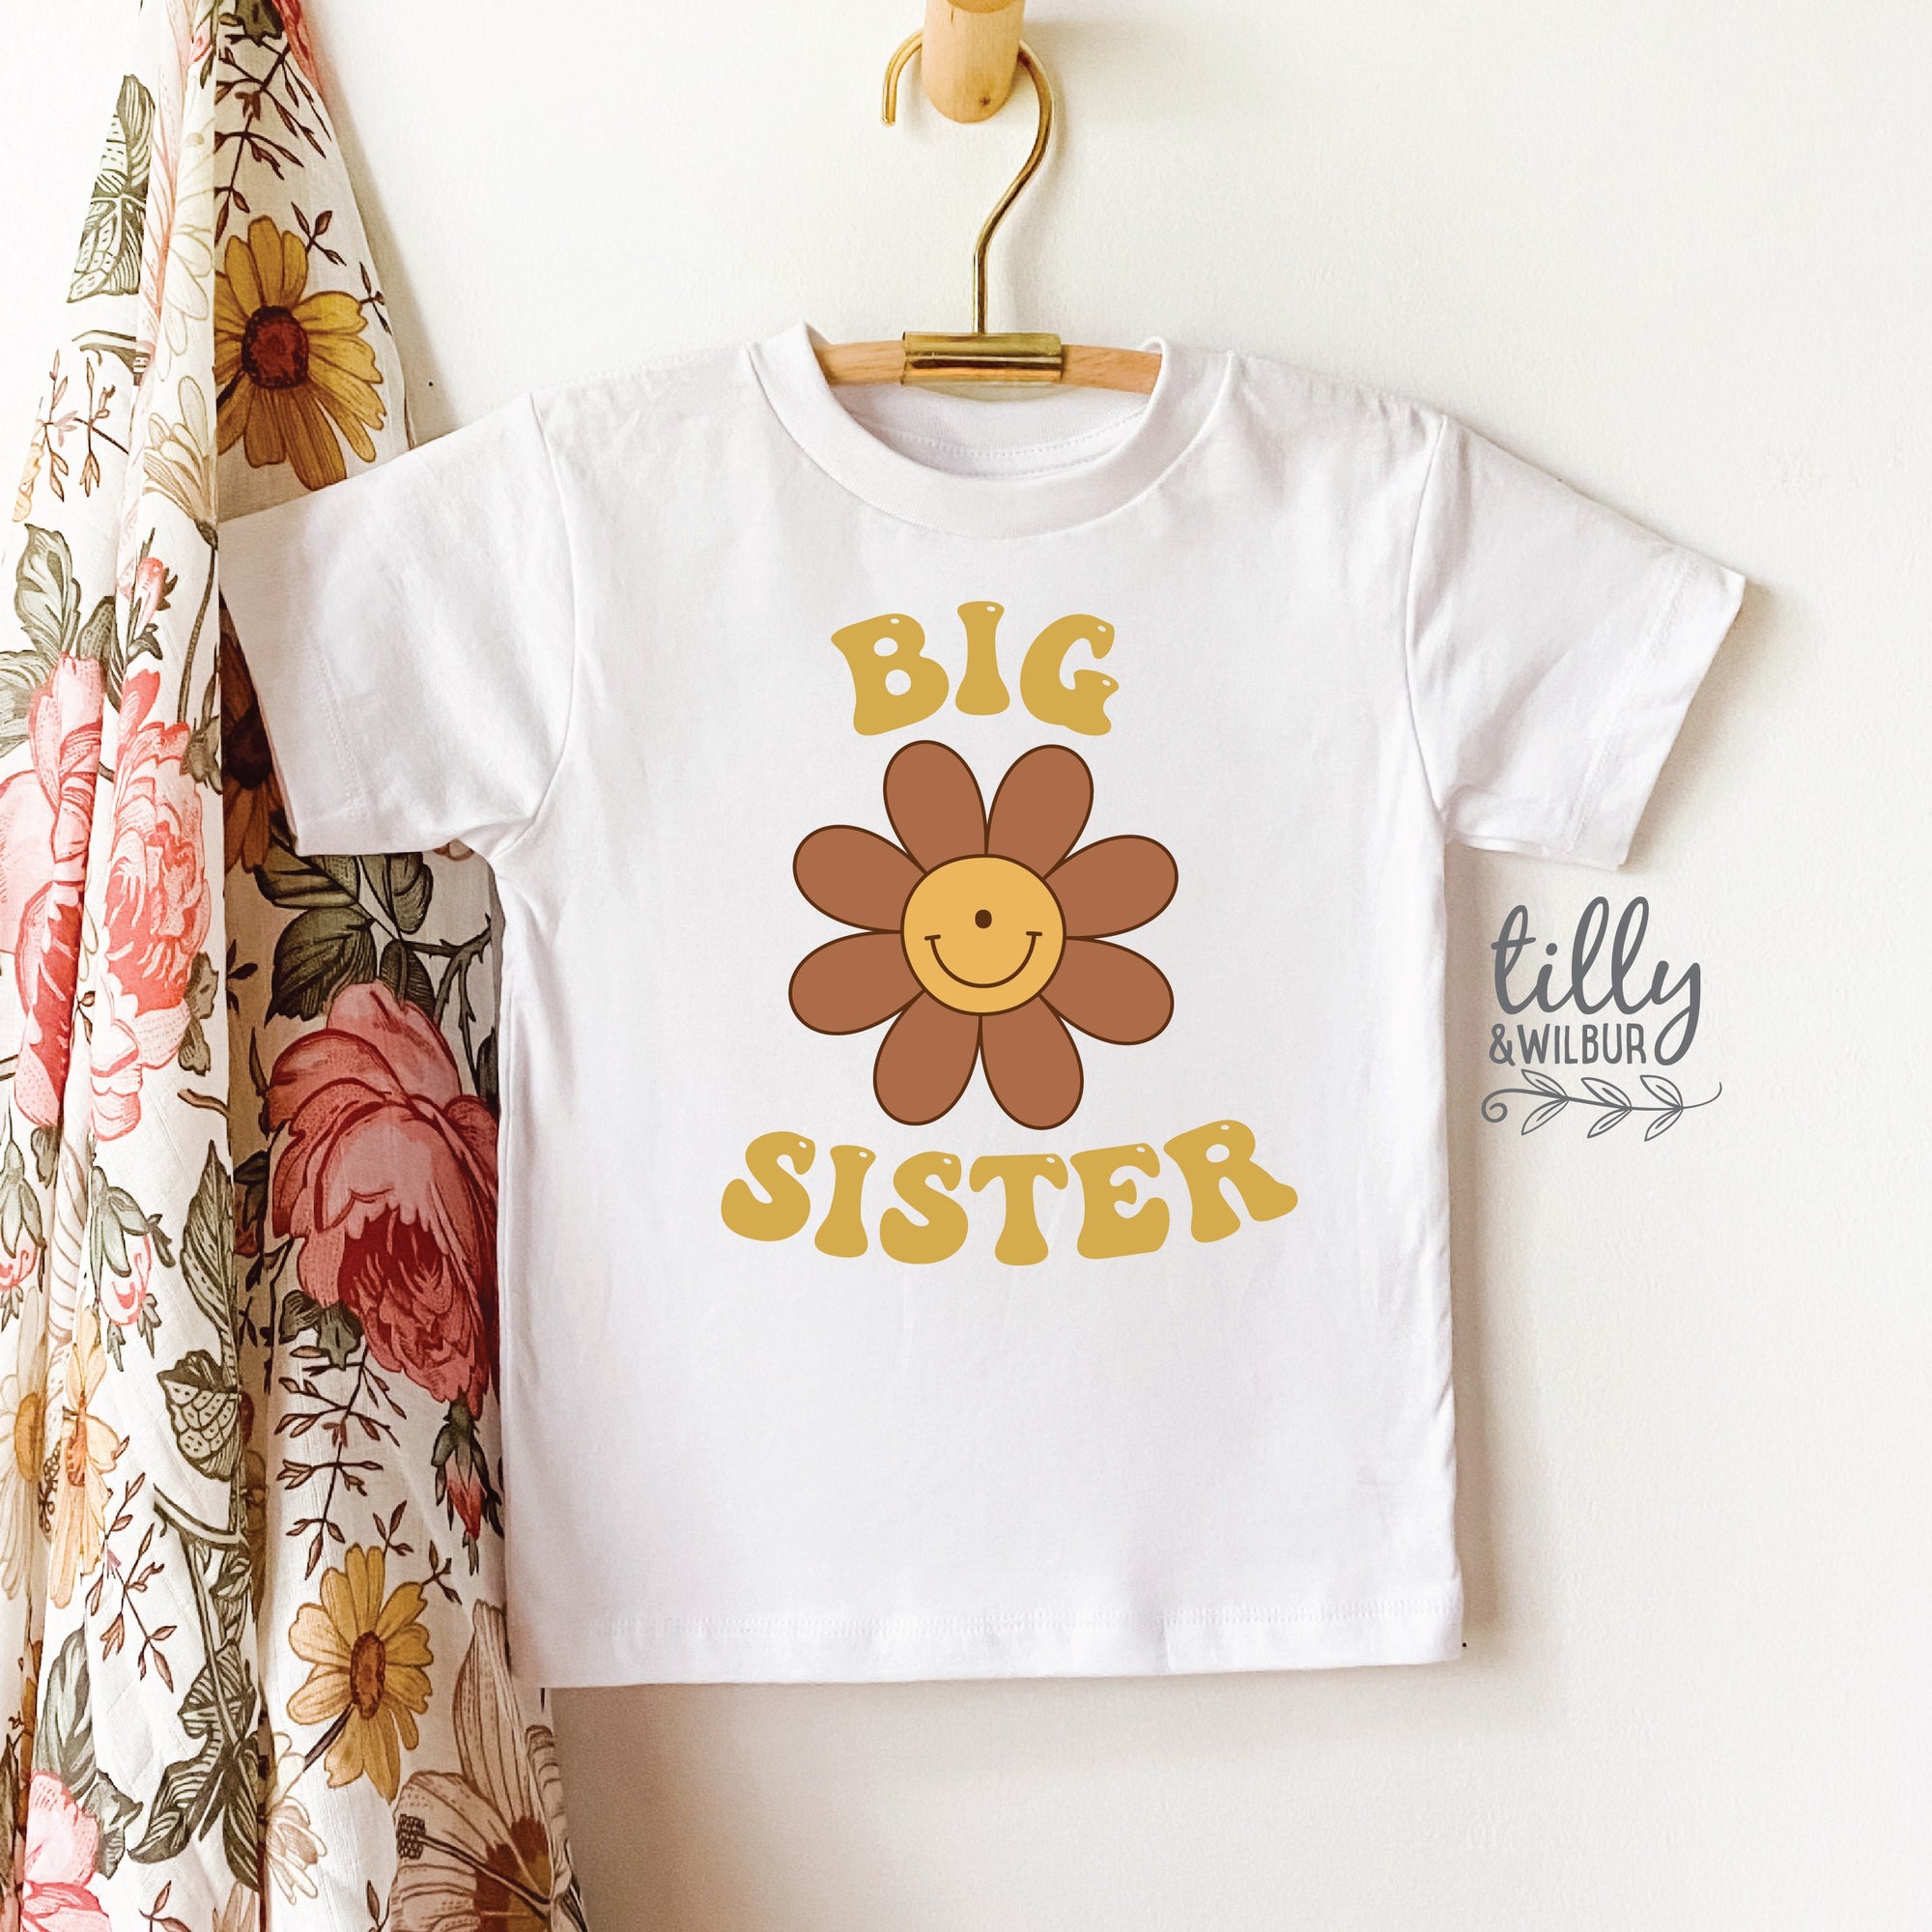 Big Sister T-Shirt, Retro Smiley Flower, I'm Going To Be A Big Sister T-Shirt, Pregnancy Announcement, Big Sister Shirt, Cousin Gift, Sis